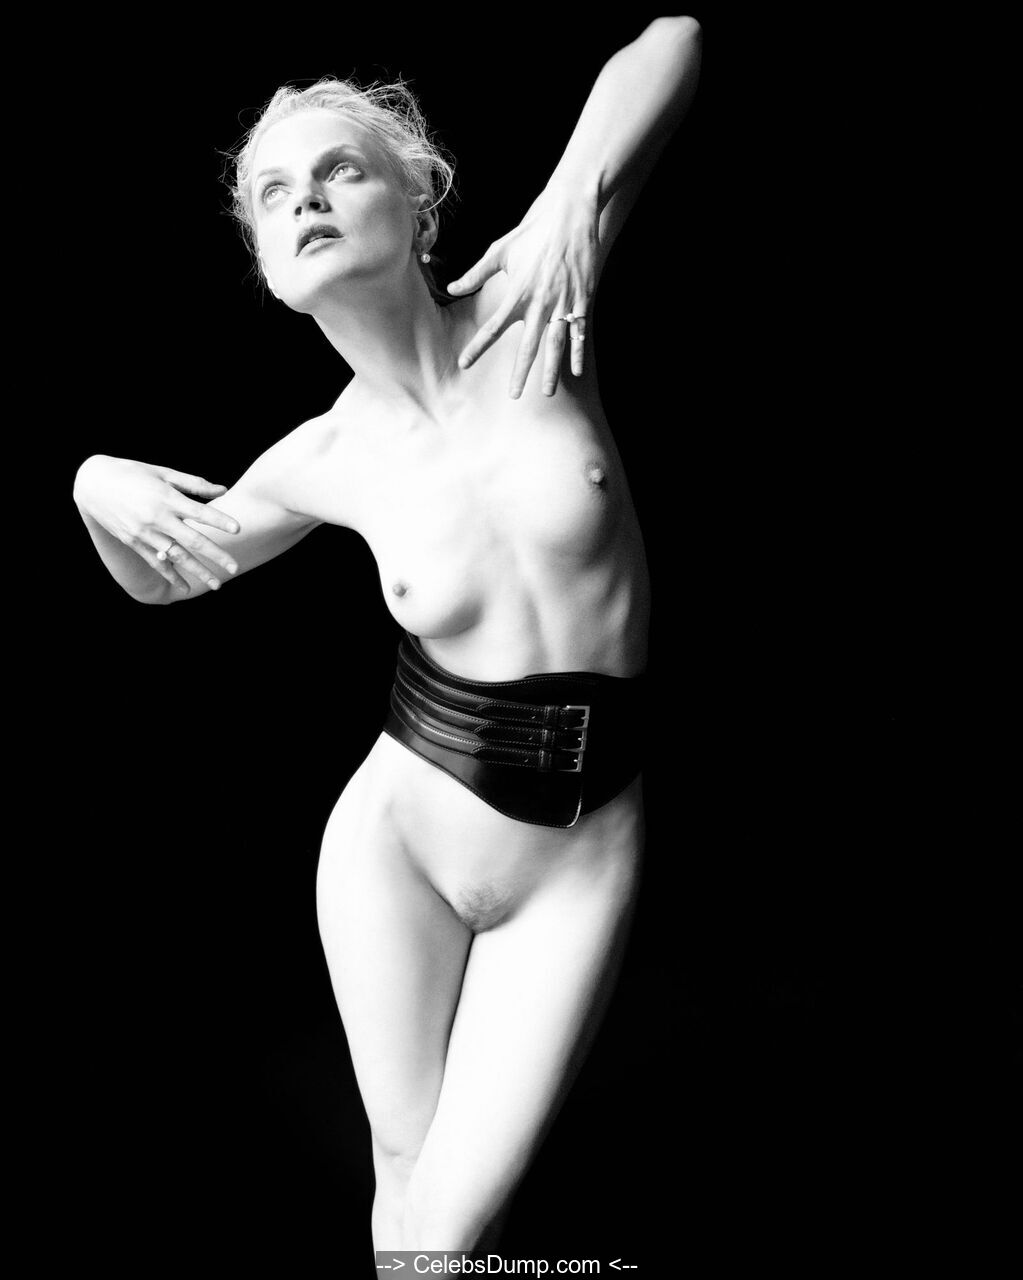 Guinevere van Seenus nude tits and pussy for Fat Magazine #4 SS 2014.